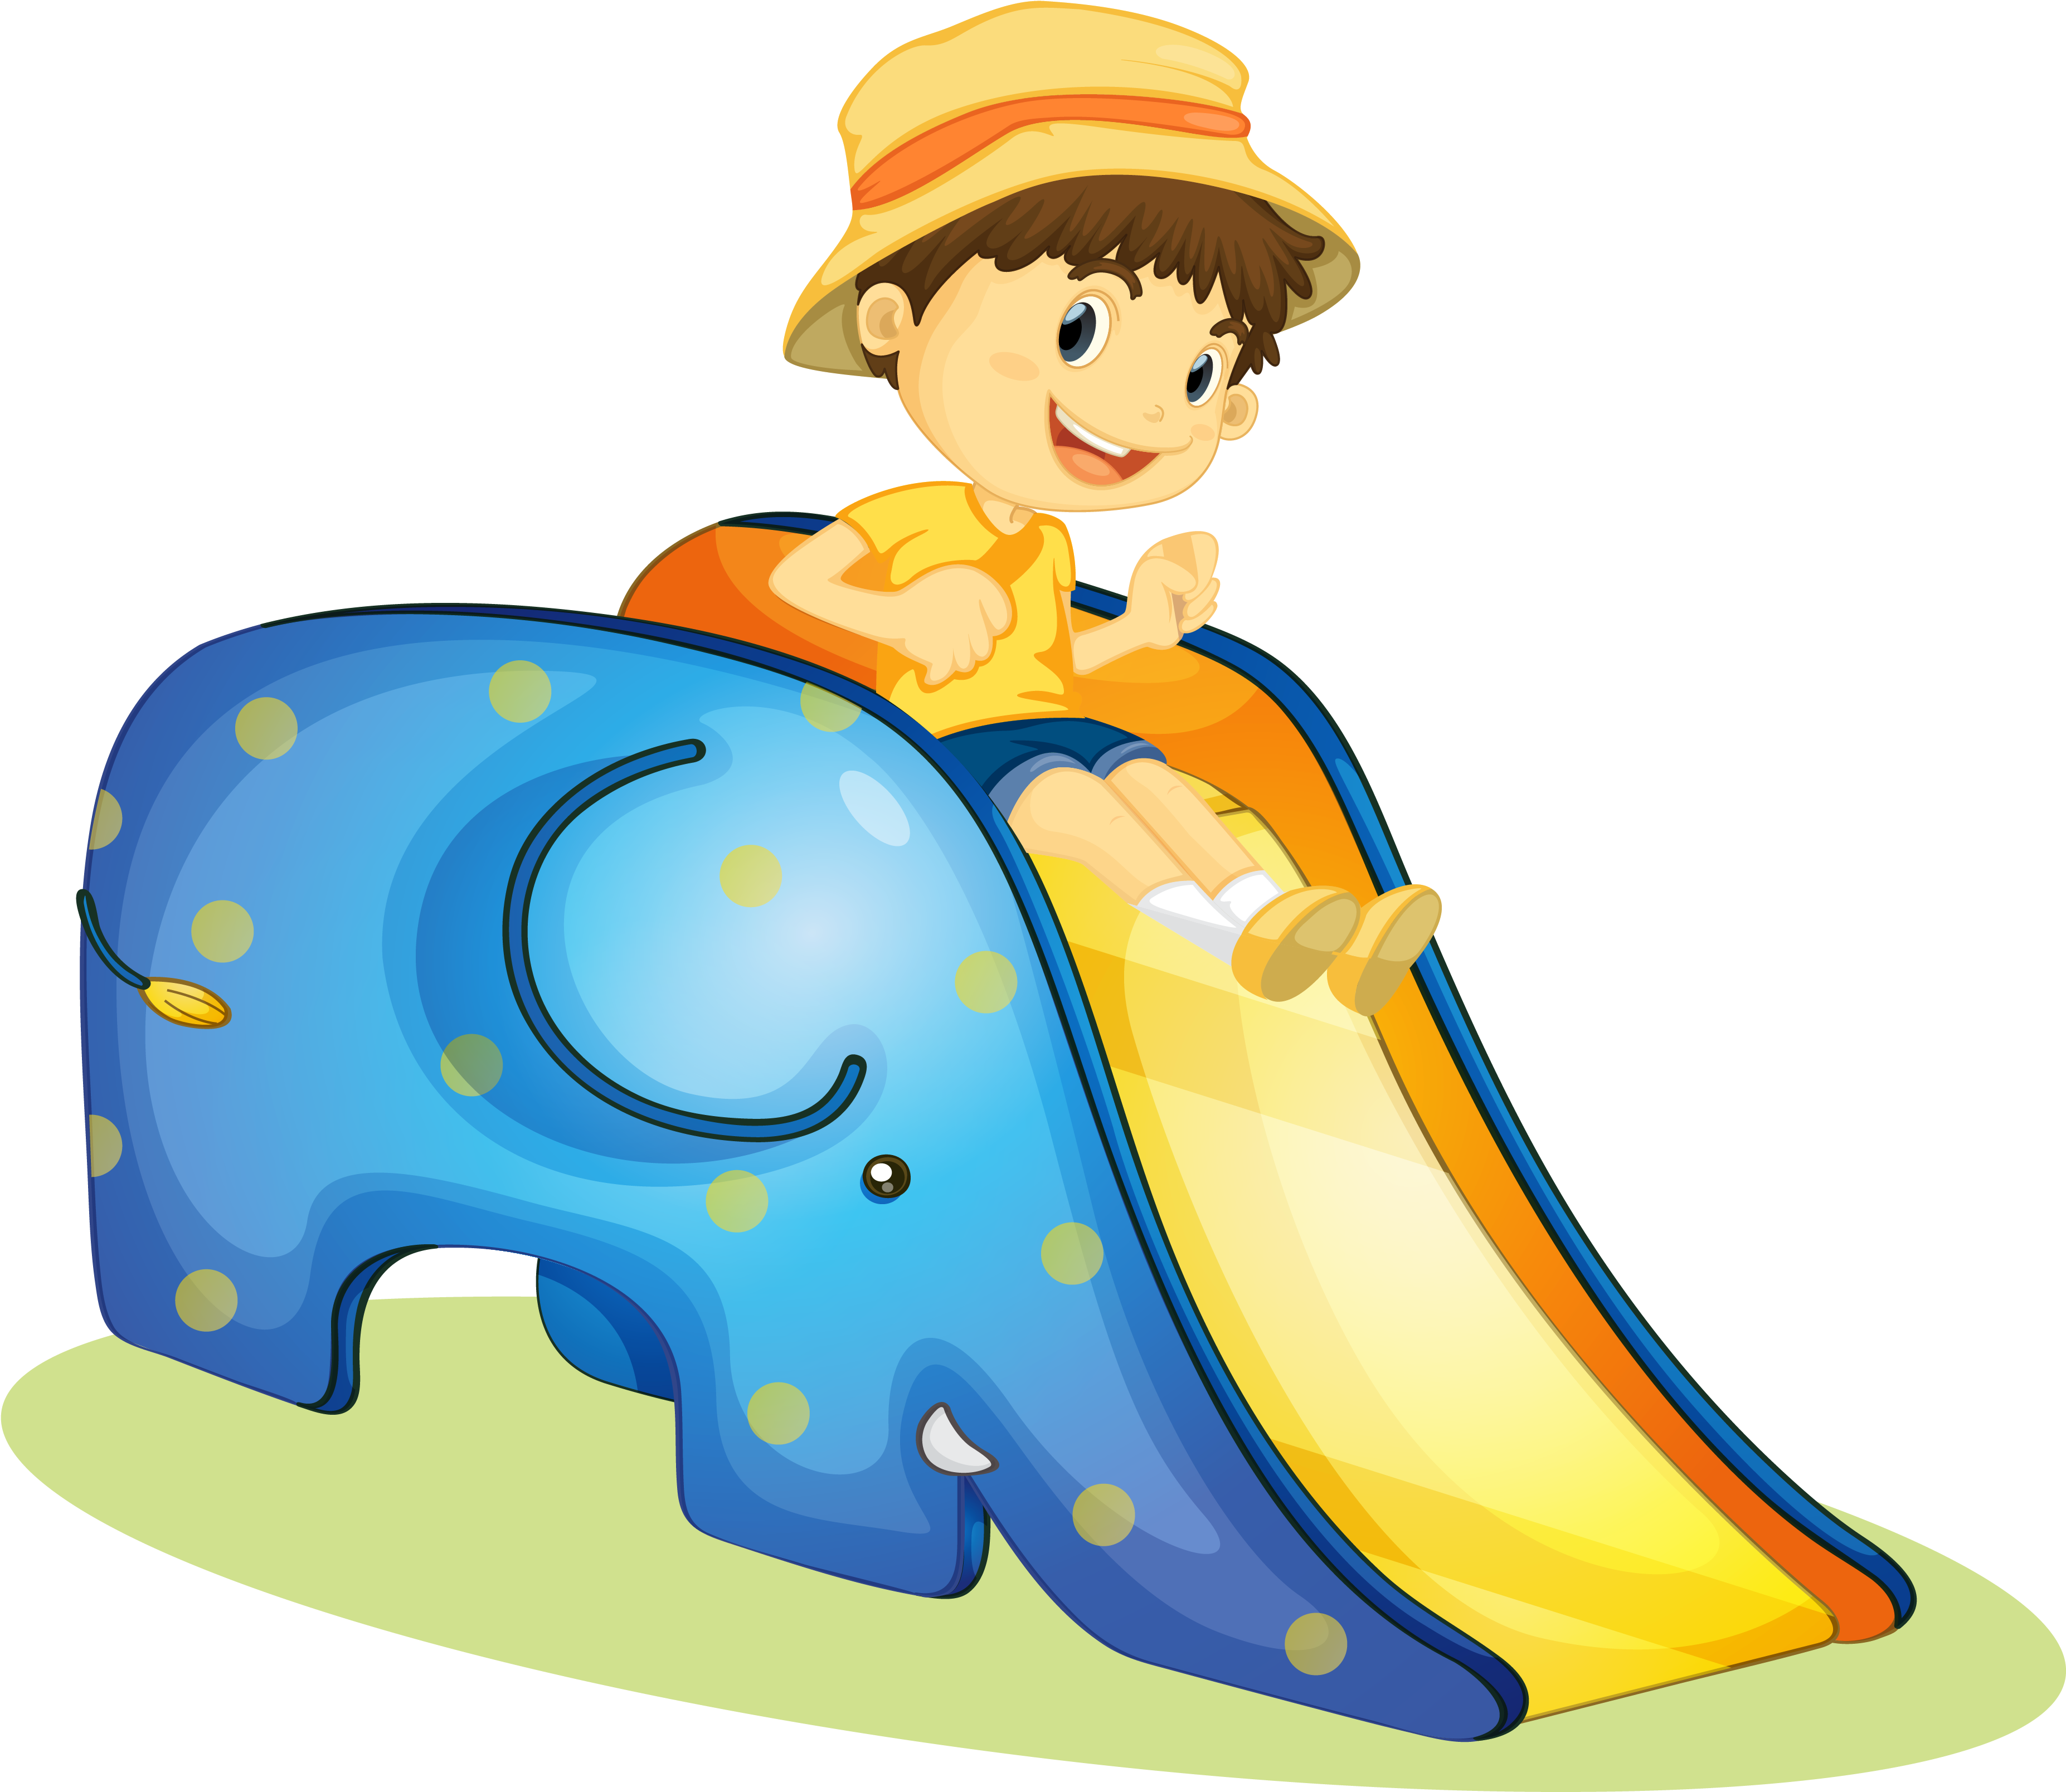 Cartoon Clip Art Playground Slide Full Size Png Clipart Images Download 